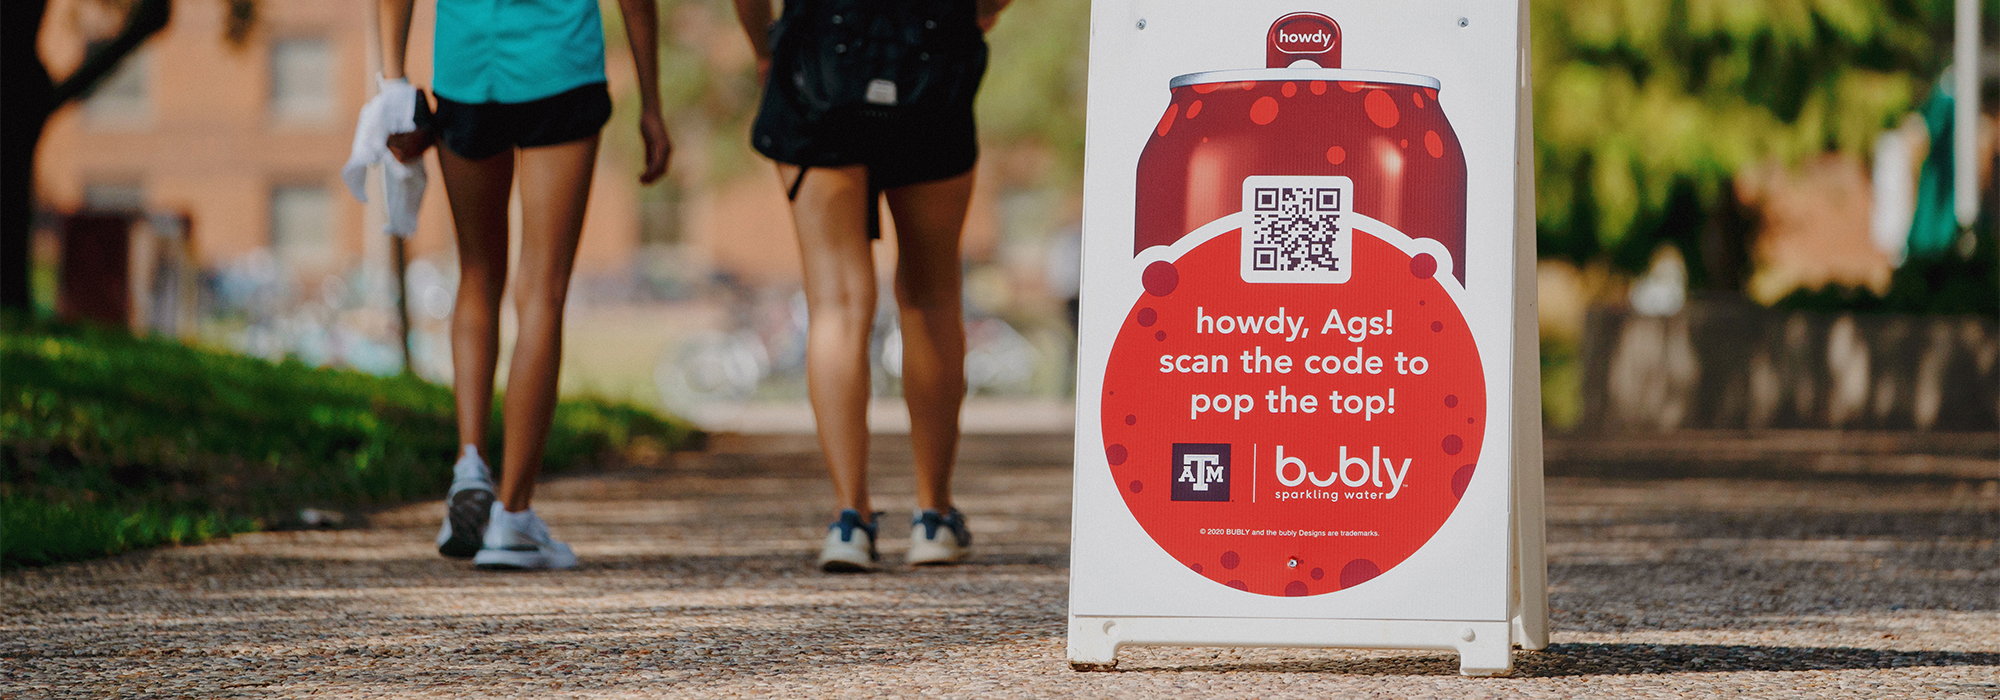 sandwich board on campus promoting Bubly Howdy Tab Vr experience 